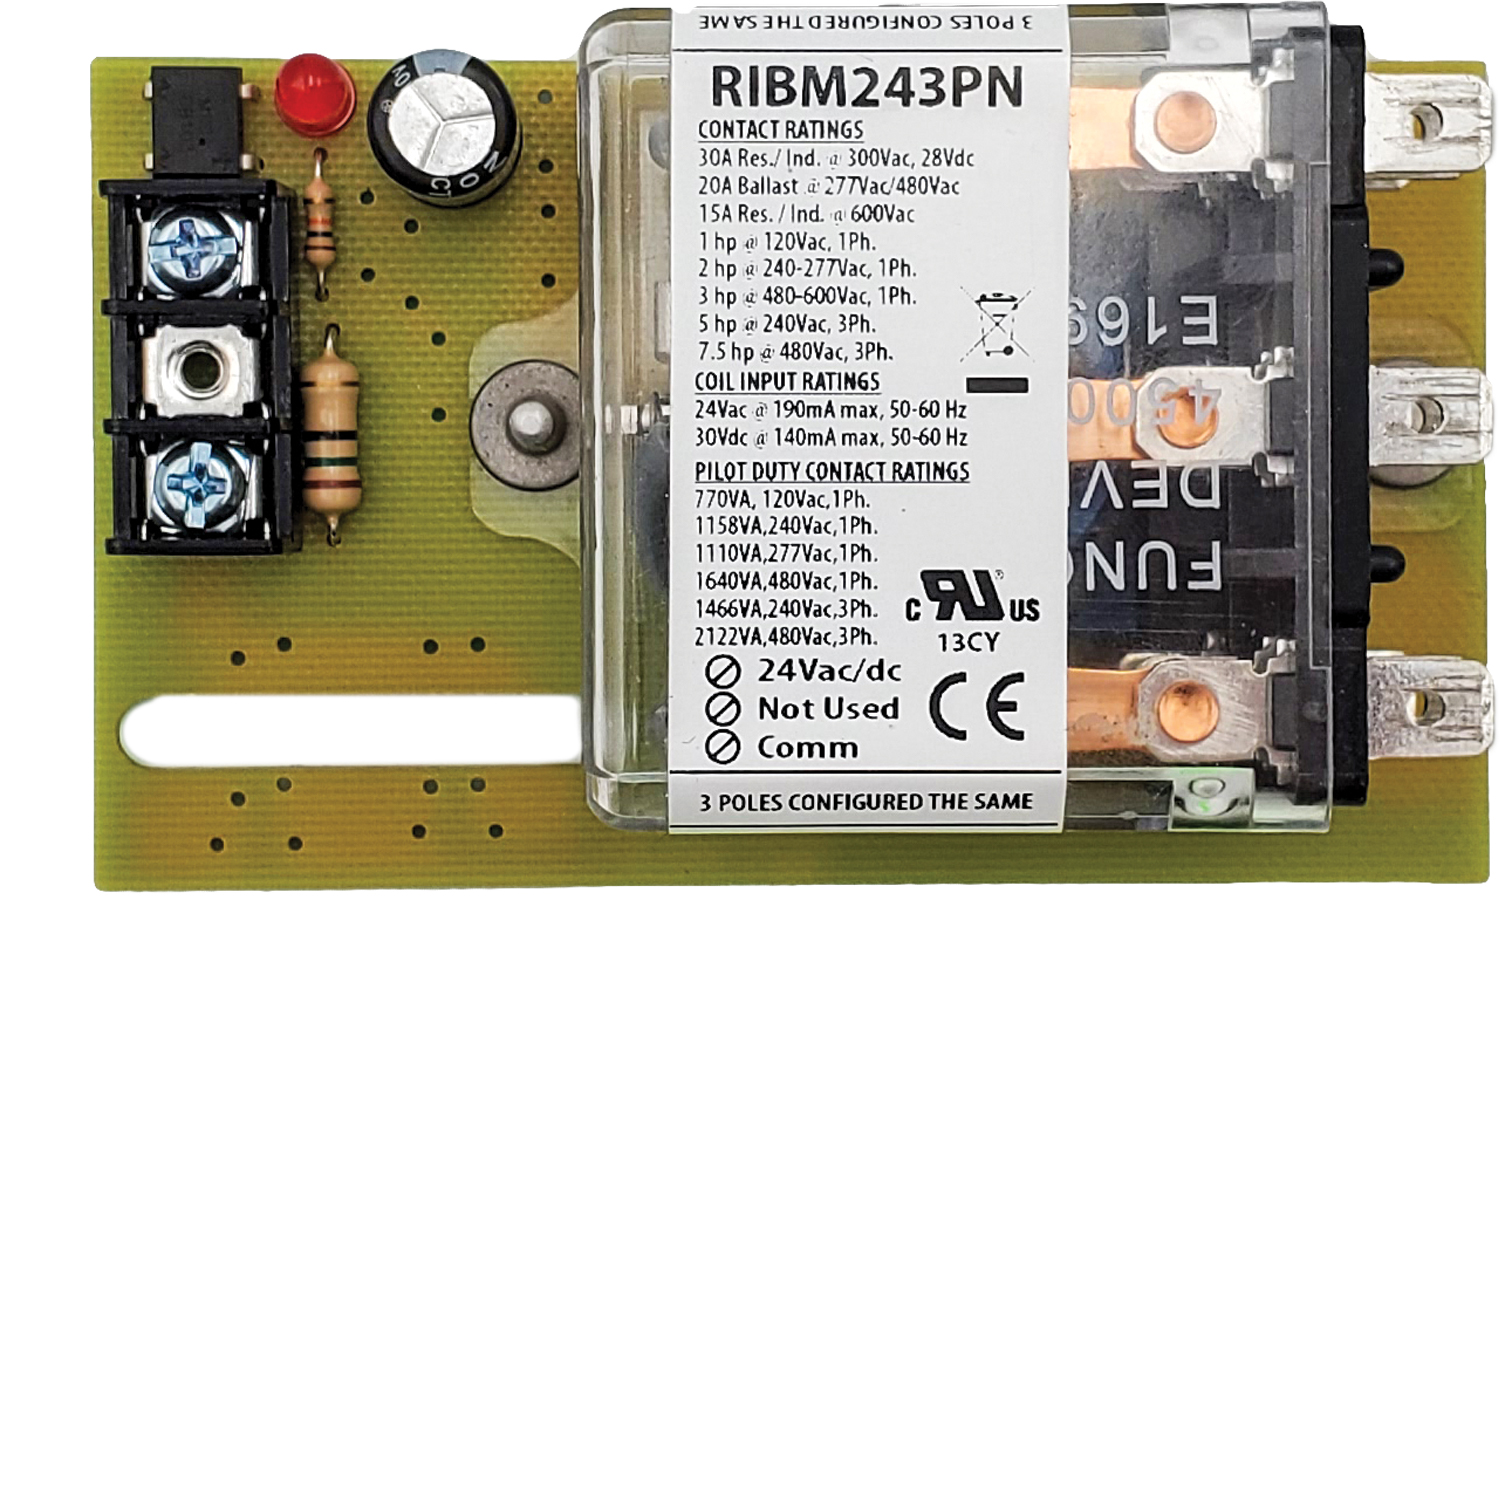 Functional Devices Inc / Rib RIBM243PN, Control Relay, With 24 VAC Coil,  3PDT, 30 A